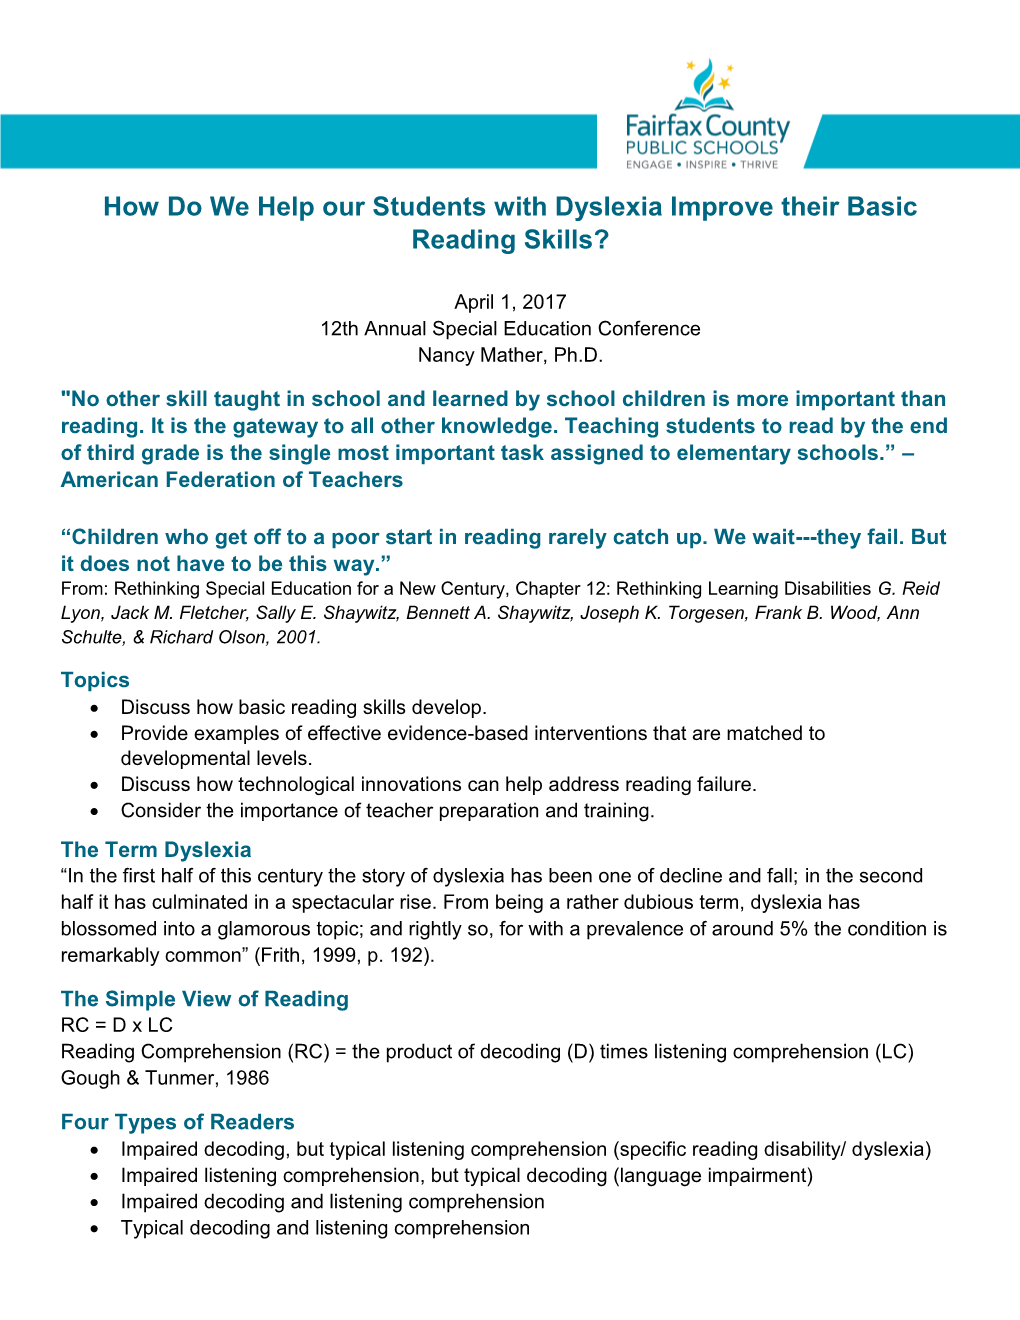 How Do We Help Our Students with Dyslexia Improve Their Basic Reading Skills?